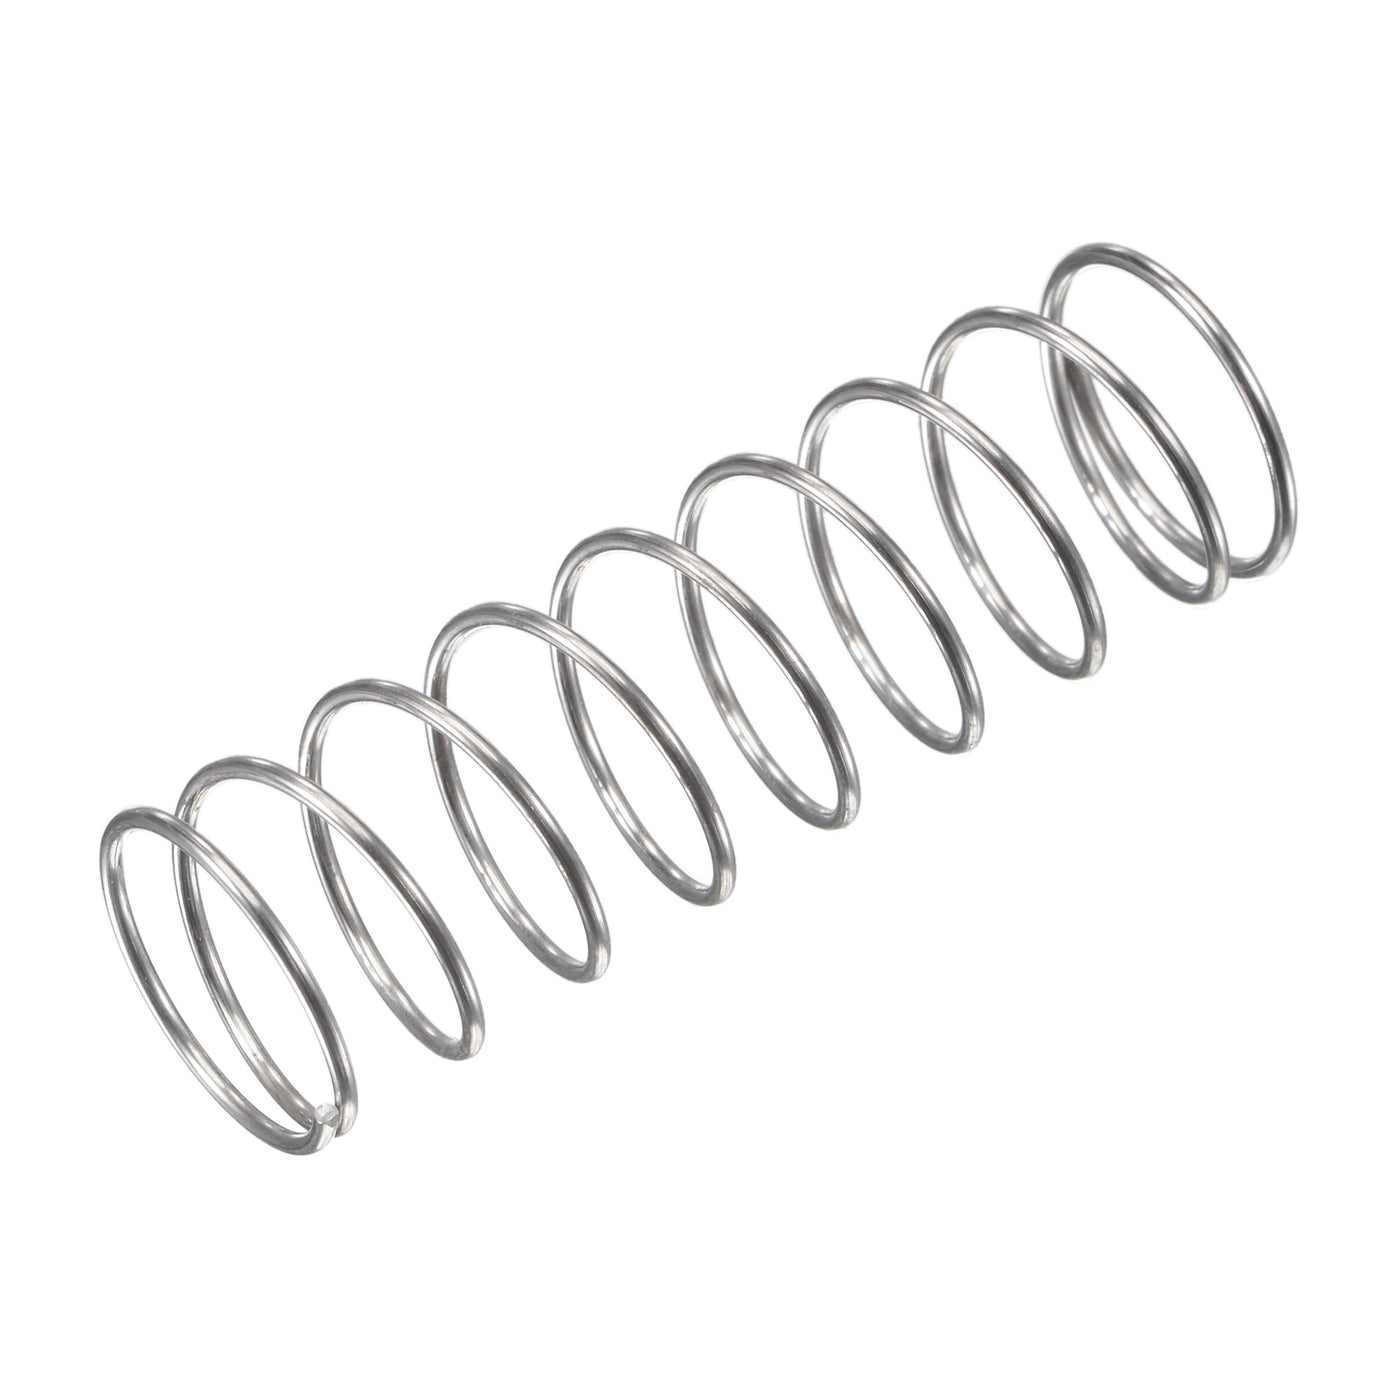 uxcell Uxcell 16mmx1mmx50mm 304 Stainless Steel Compression Spring 5.9N Load Capacity 5pcs